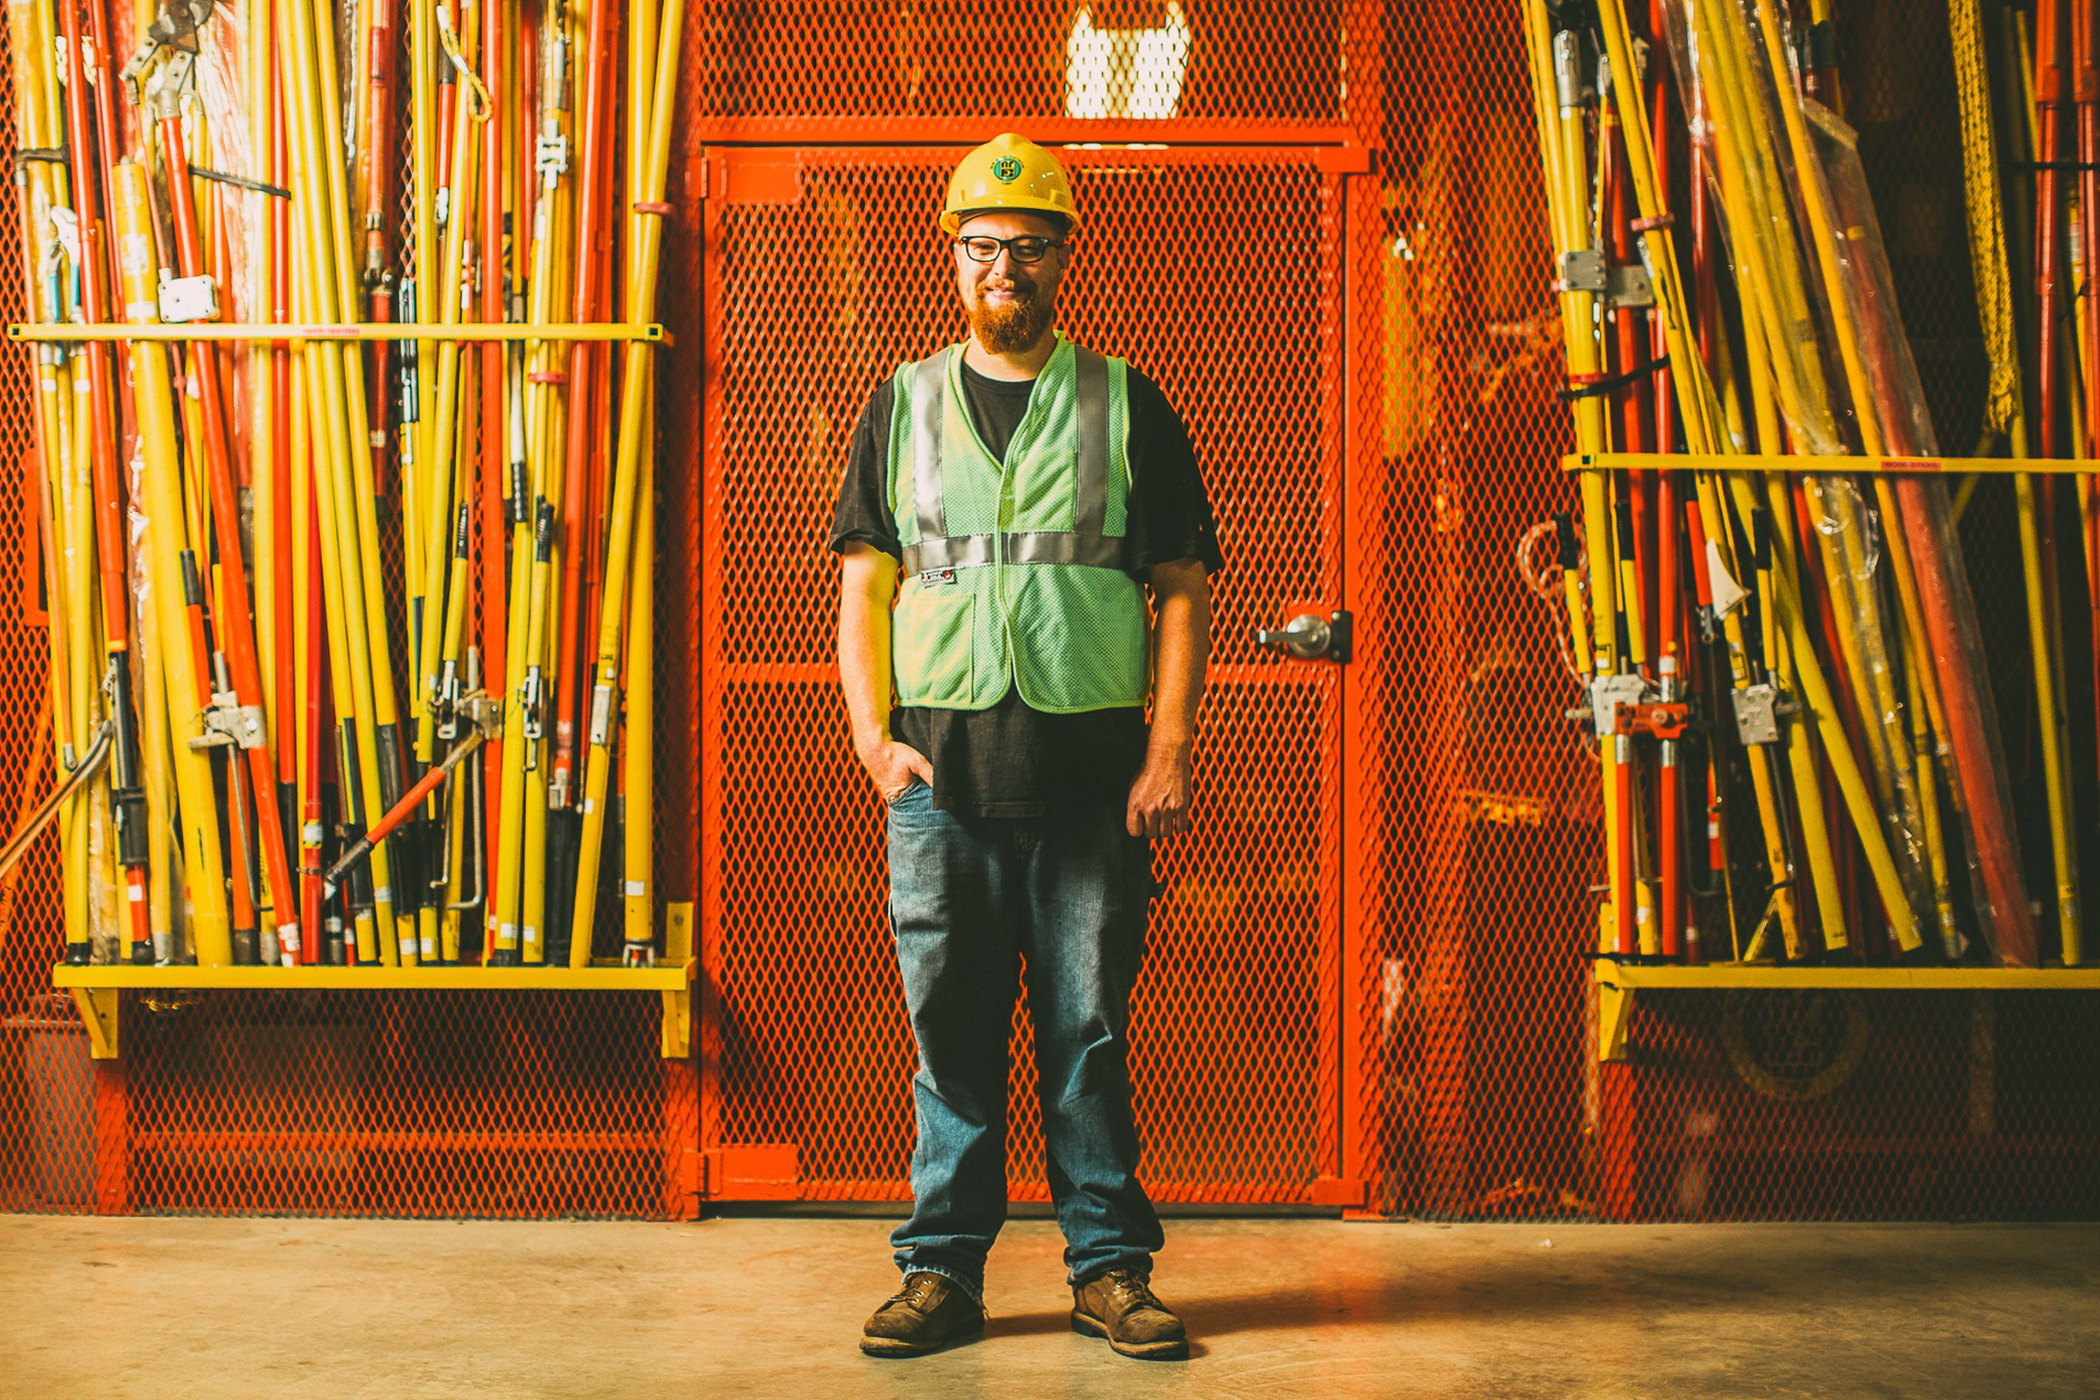 NRE employee in safety equipment standing in front of a grated orange wall with yellow construction poles standing behind them.